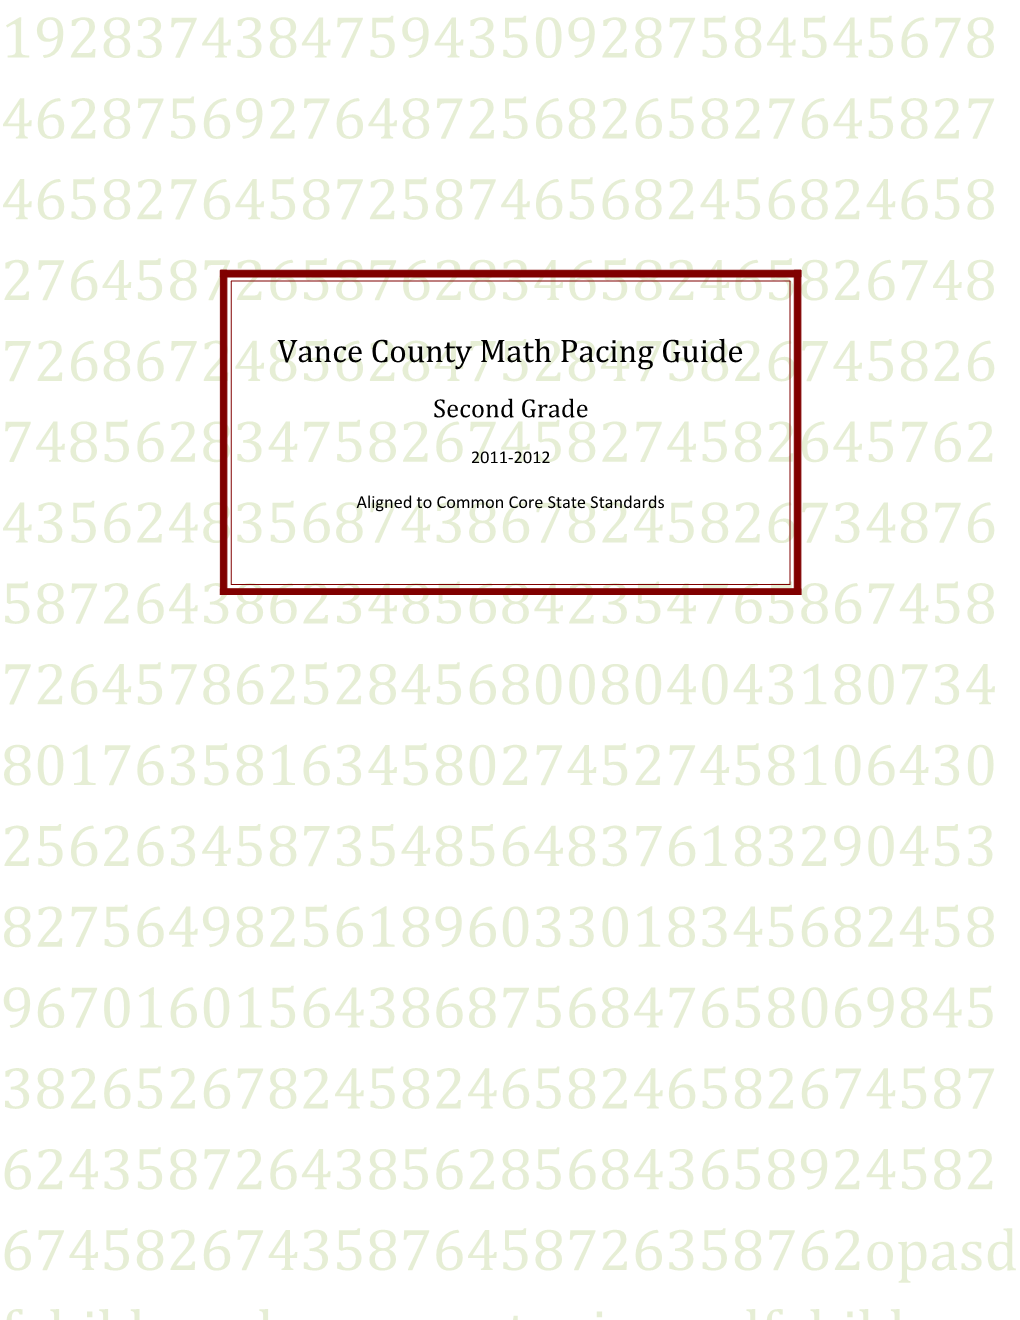 Vance County Math Pacing Guide